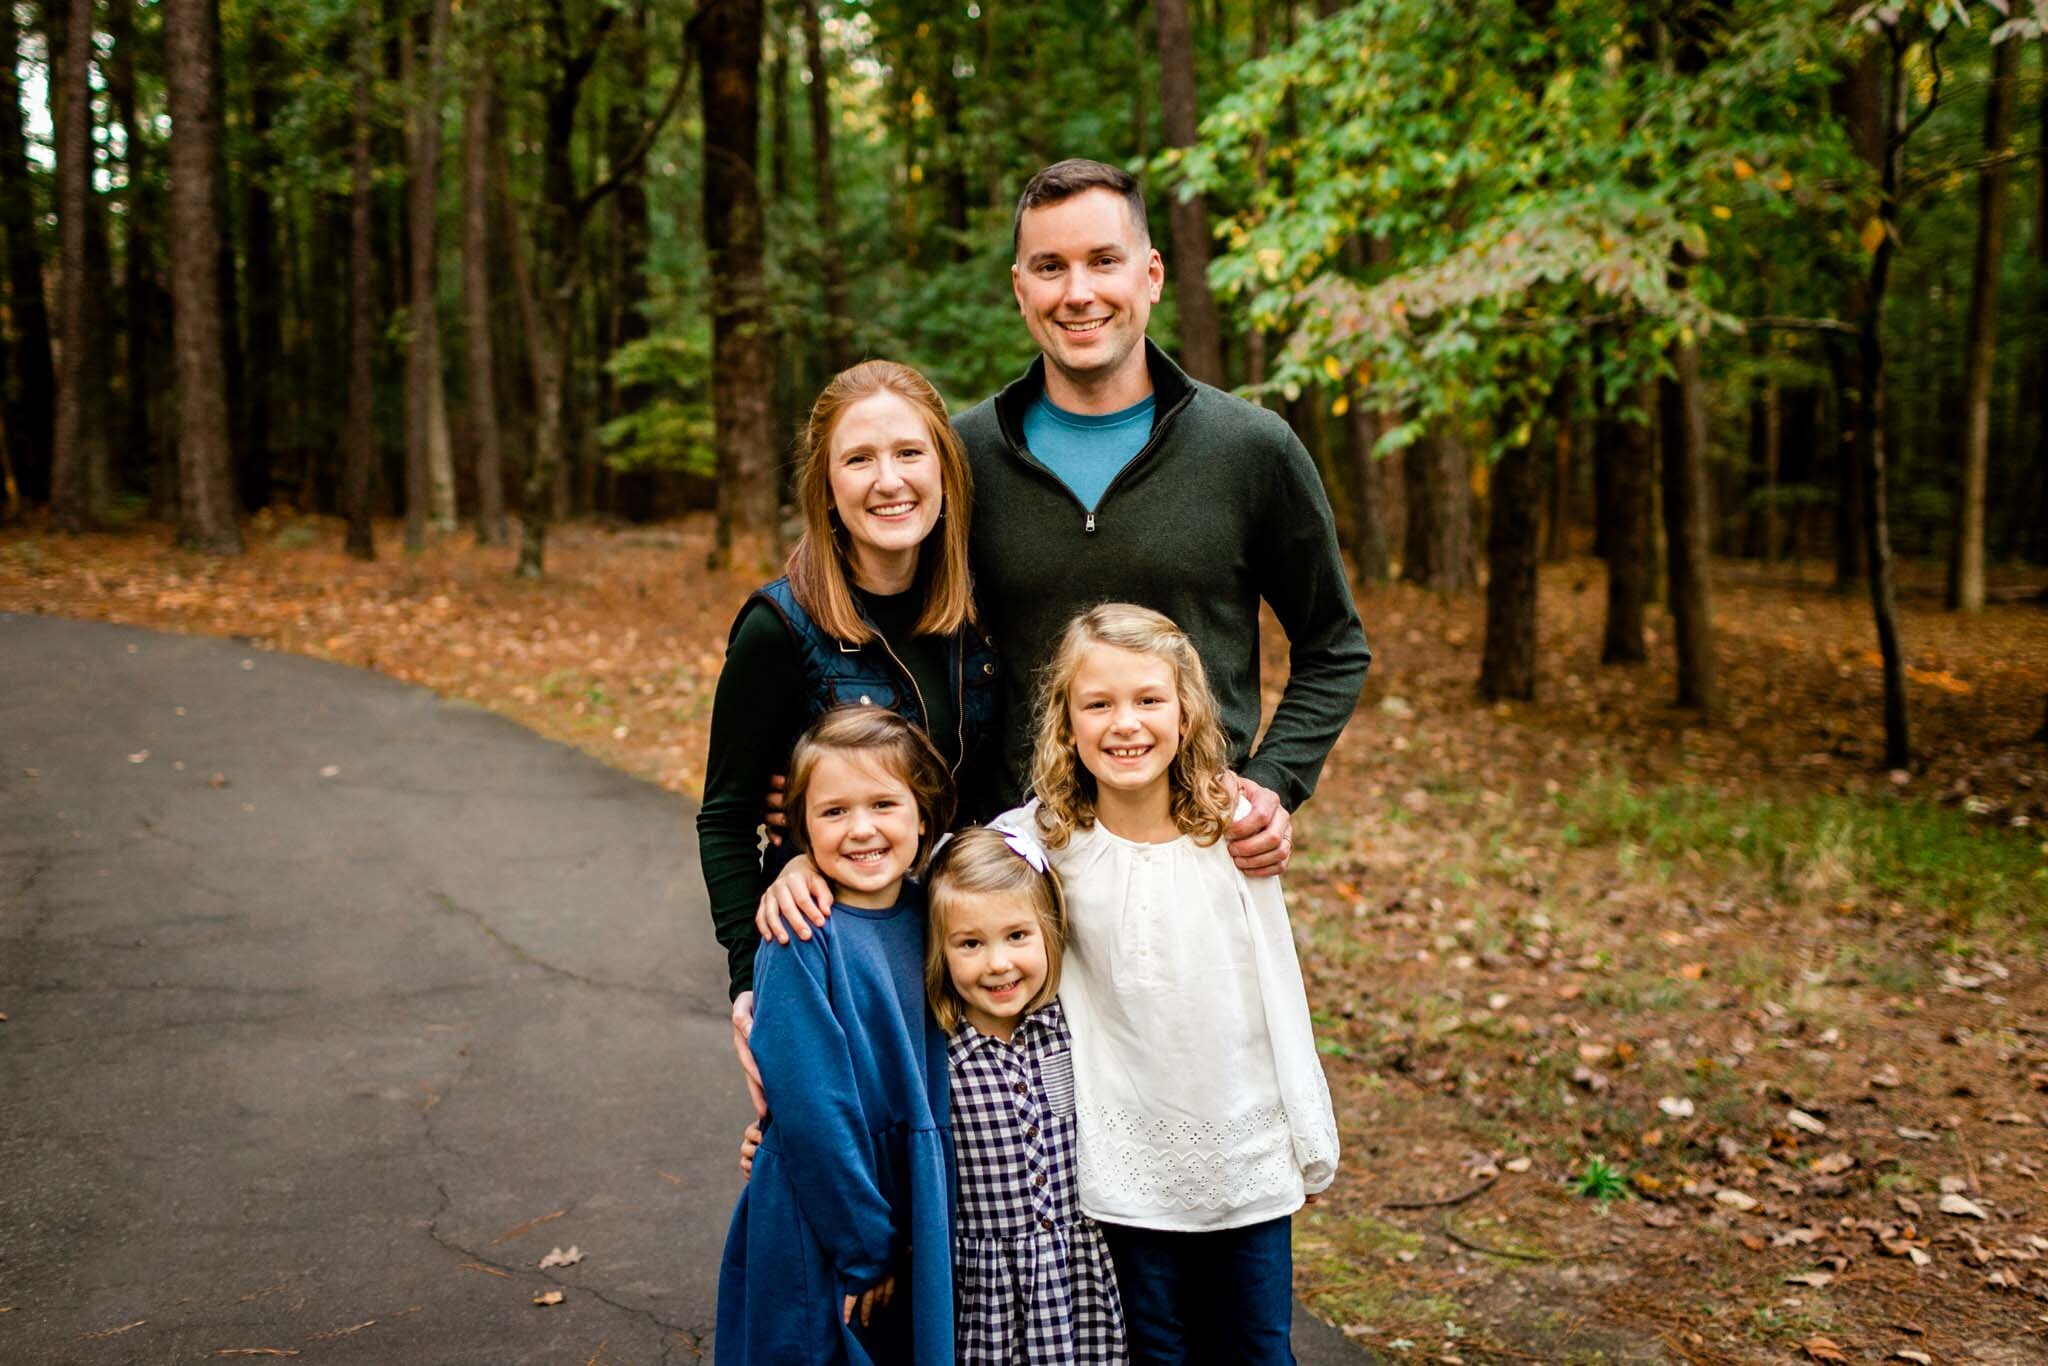 Raleigh Family Photographer | Umstead Park | By G. Lin Photography | Fall family photo outside